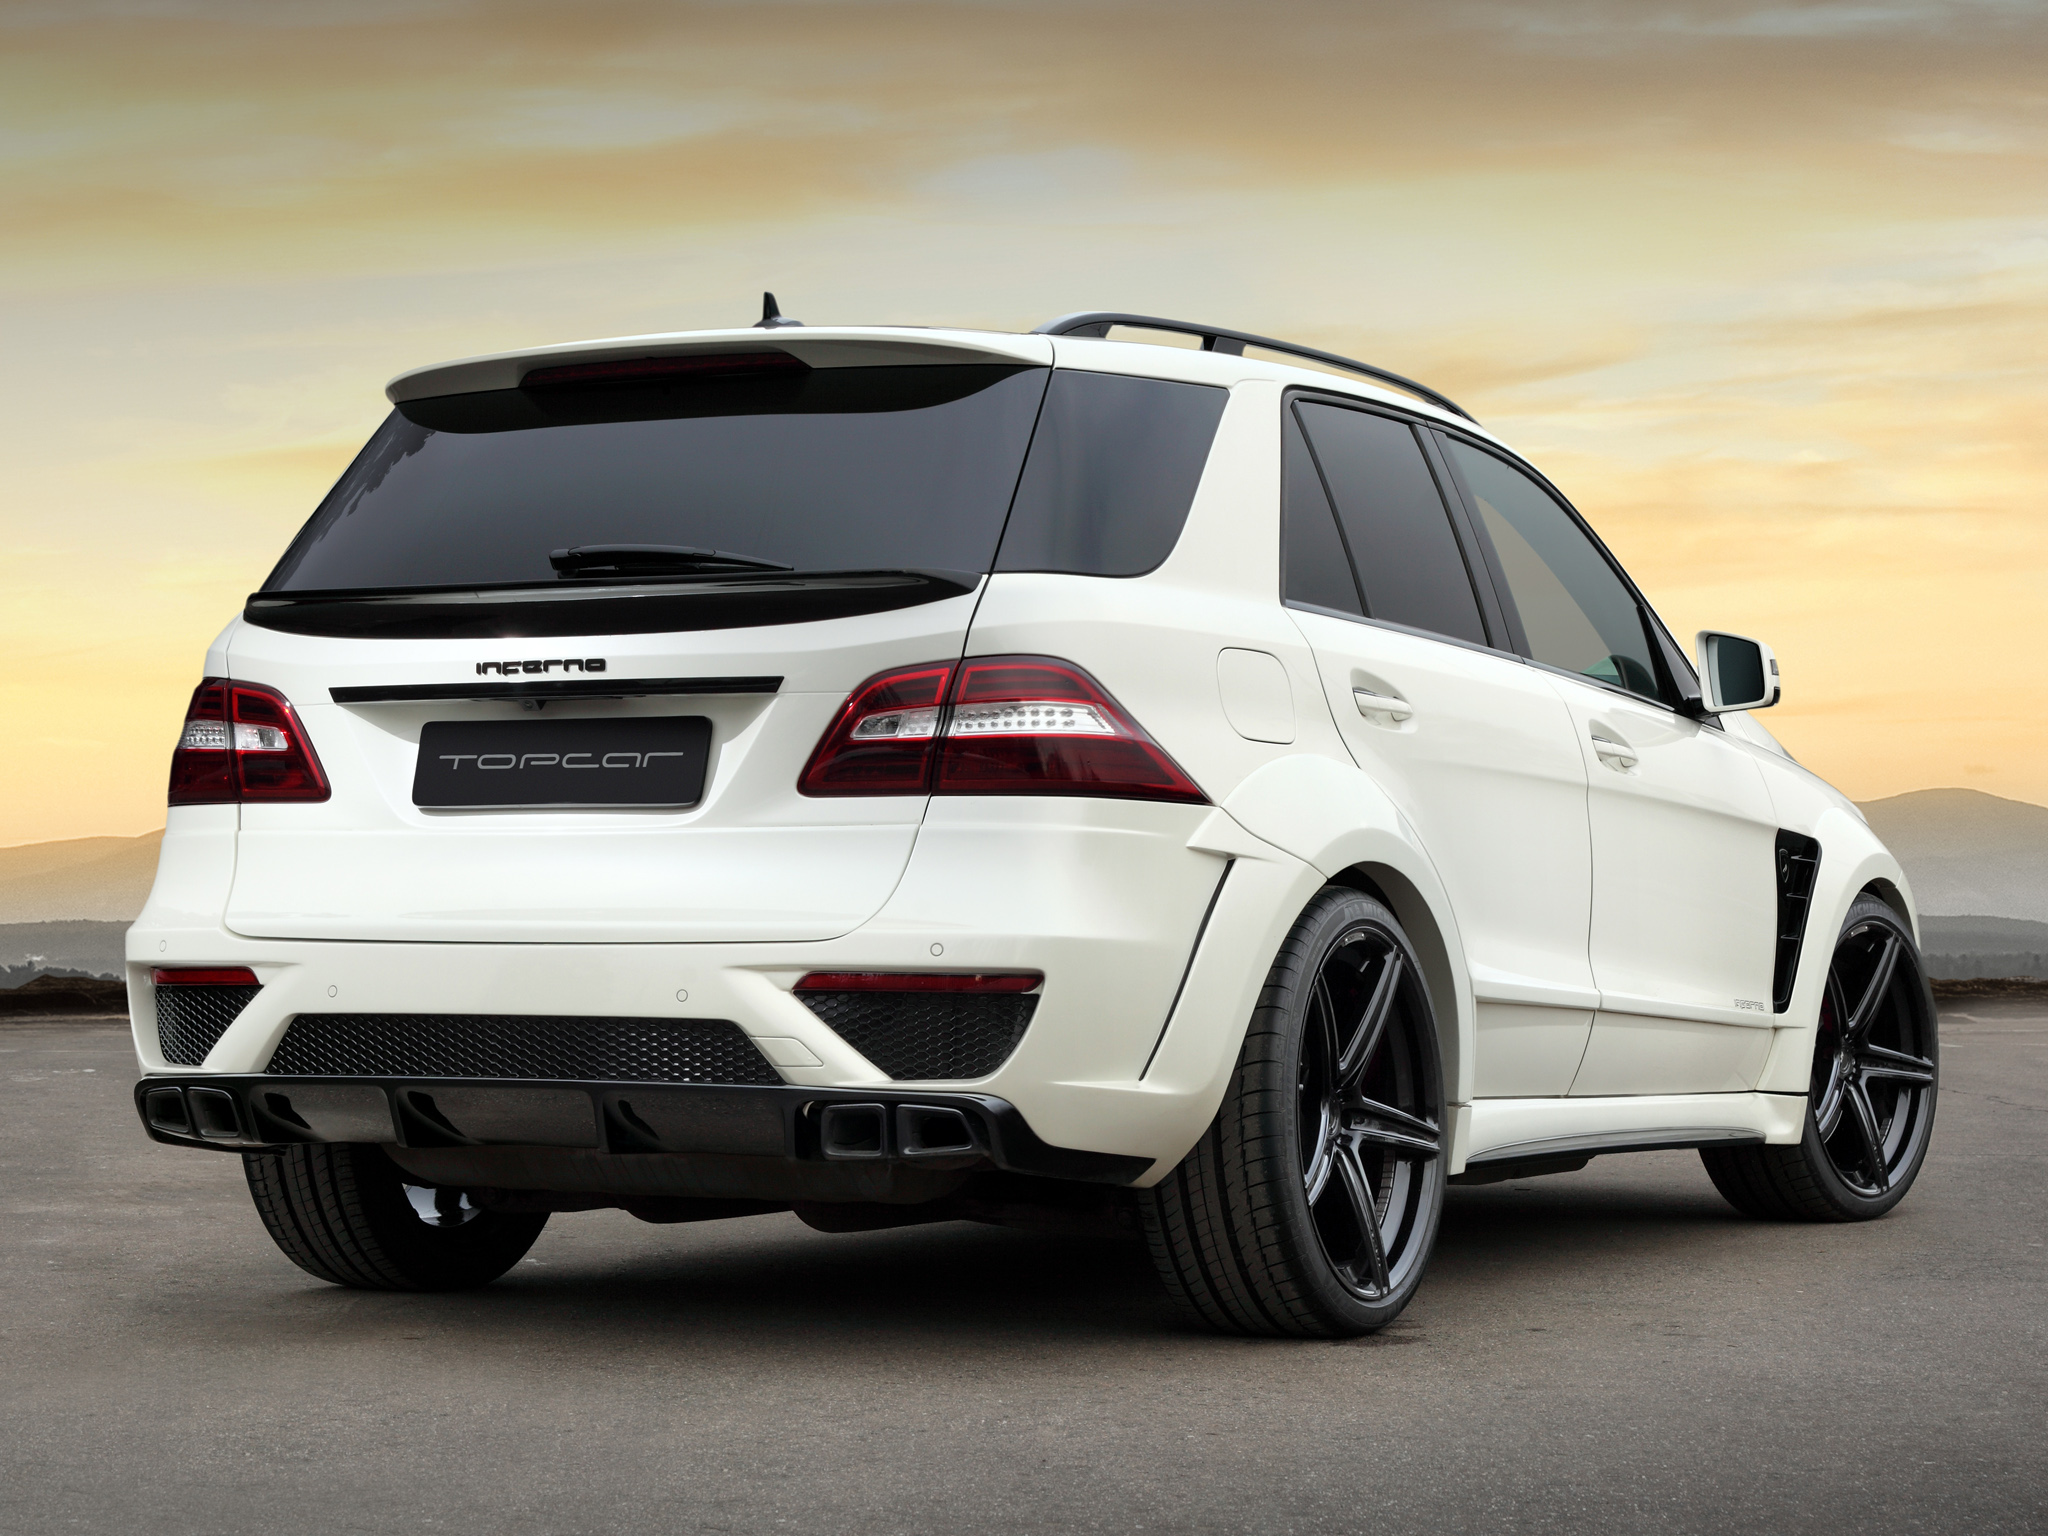 2012 Topcar Mercedes Benz M Klasse Inferno W166 Tuning Suv Wallpapers Hd Desktop And Mobile Backgrounds